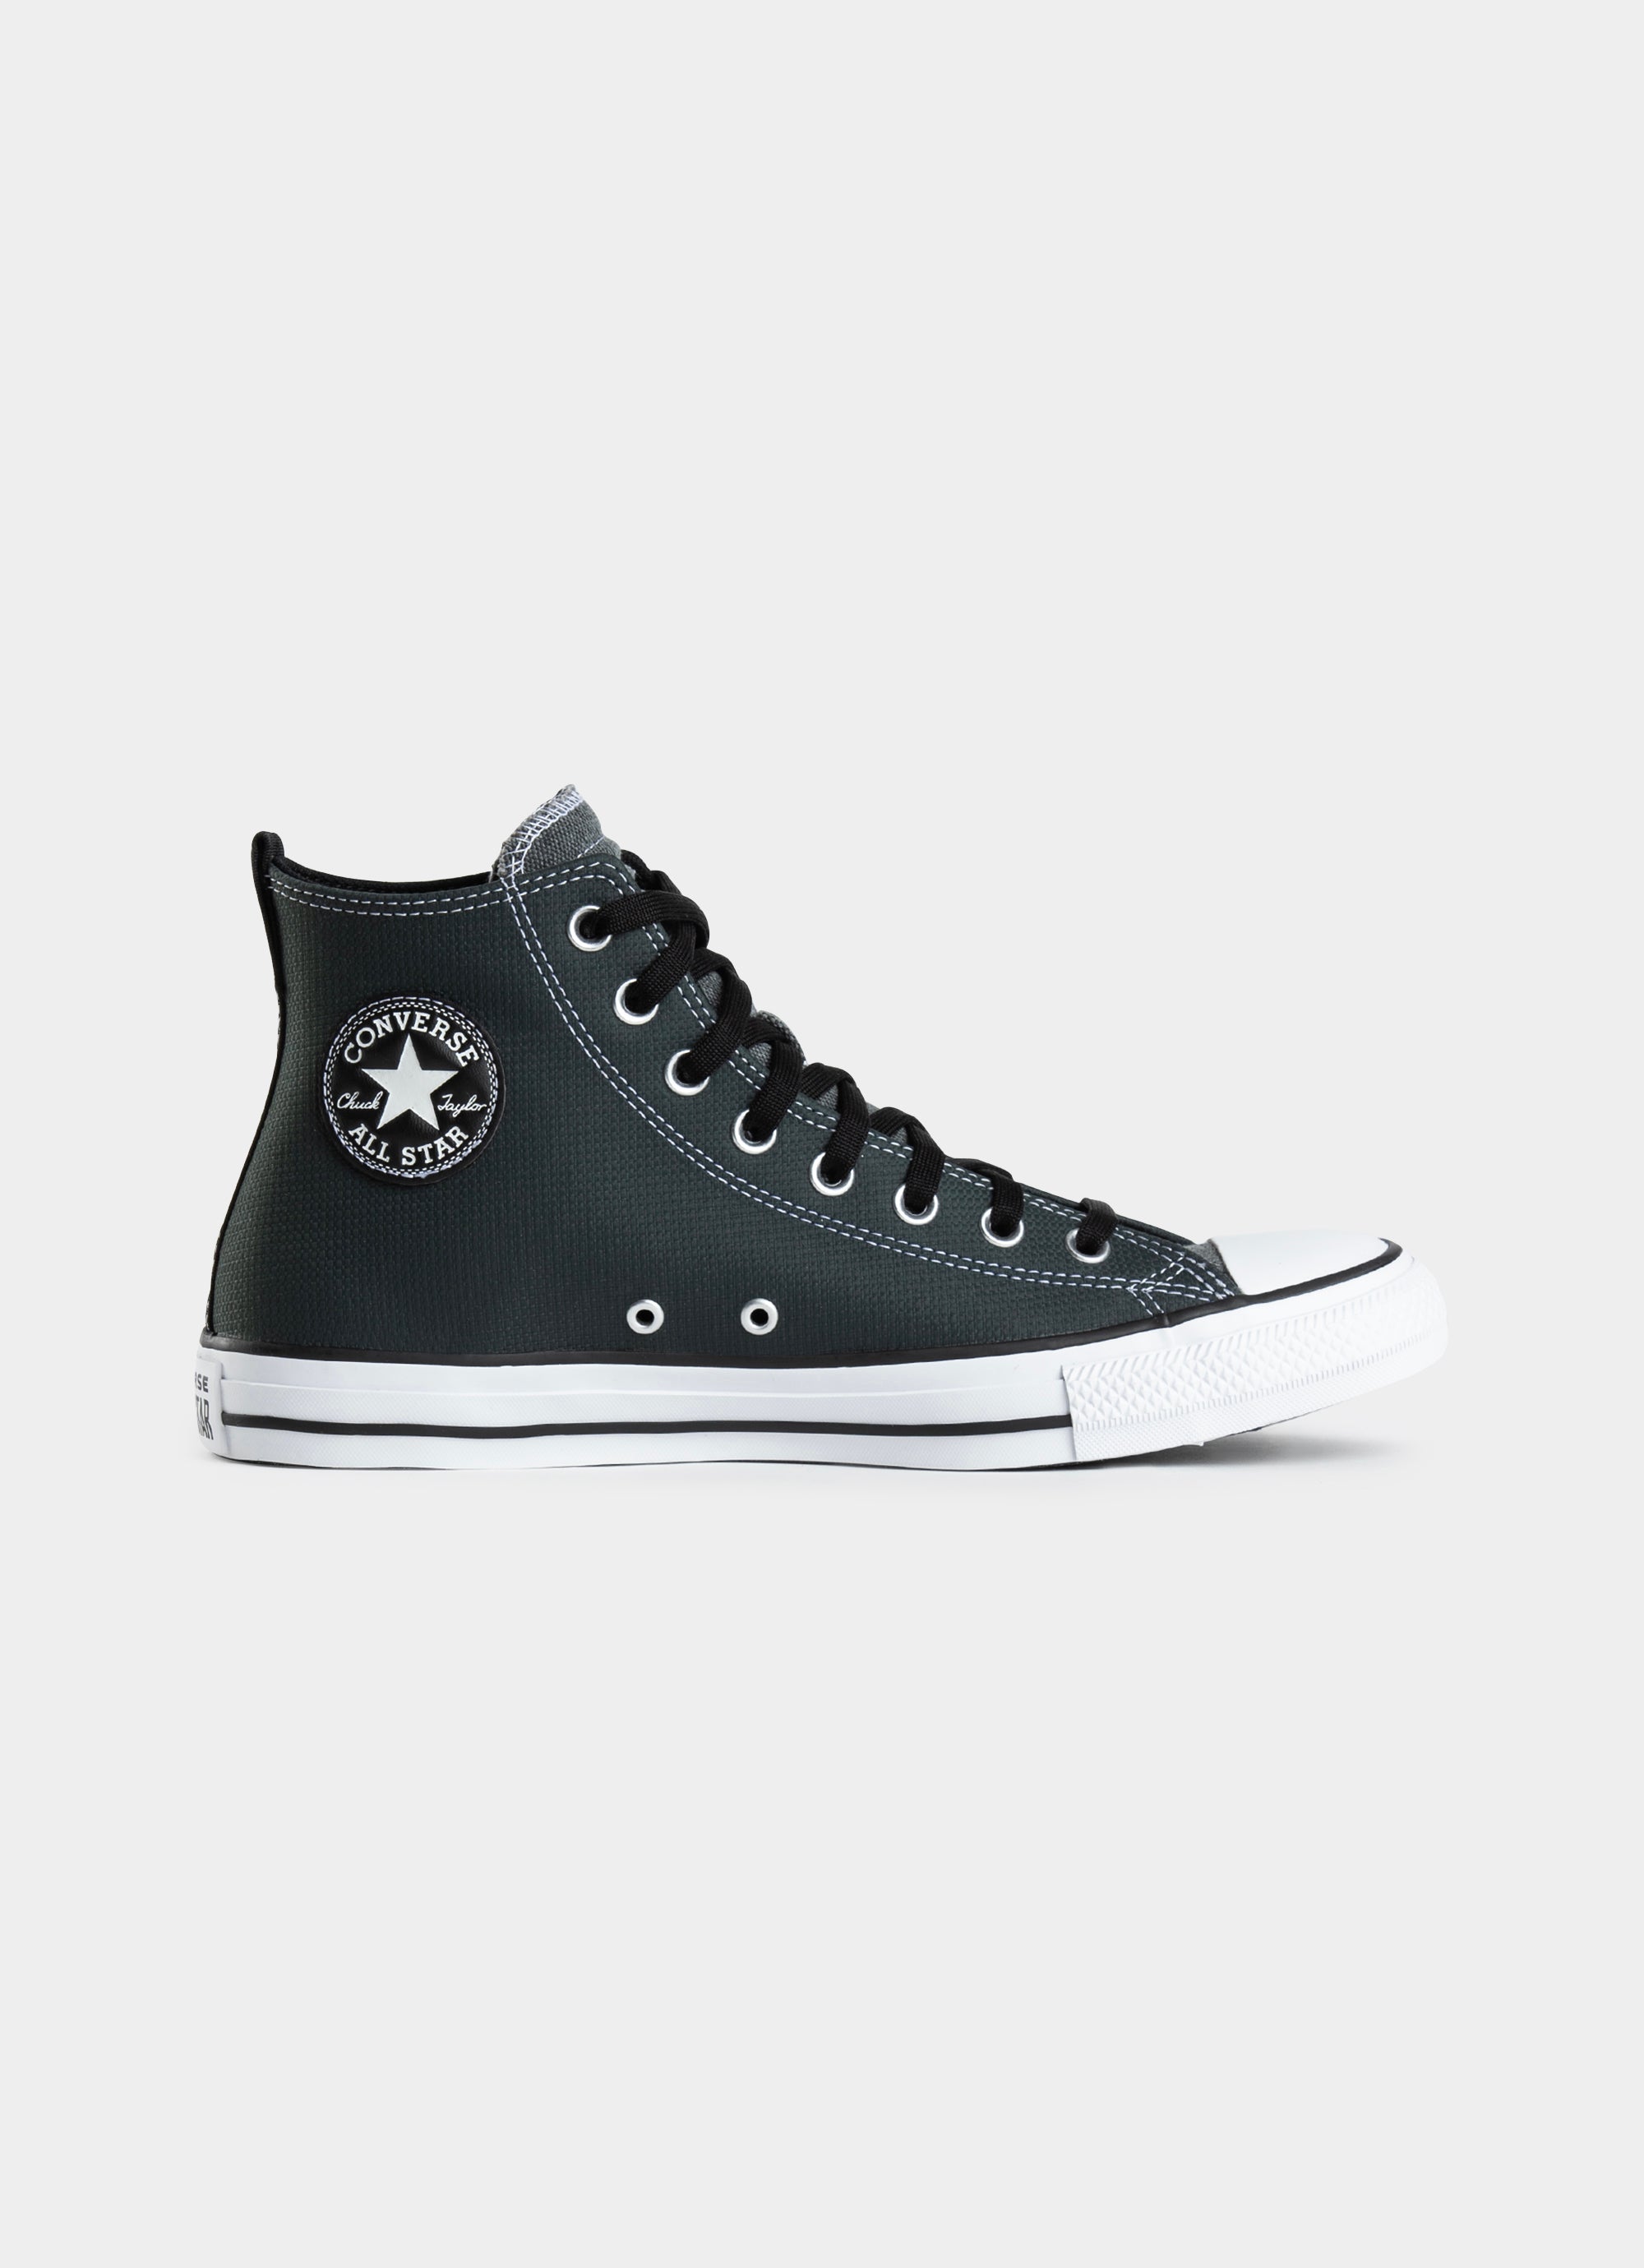 Converse Chuck Taylor Counter Climate Hi Pin Shoes in Green